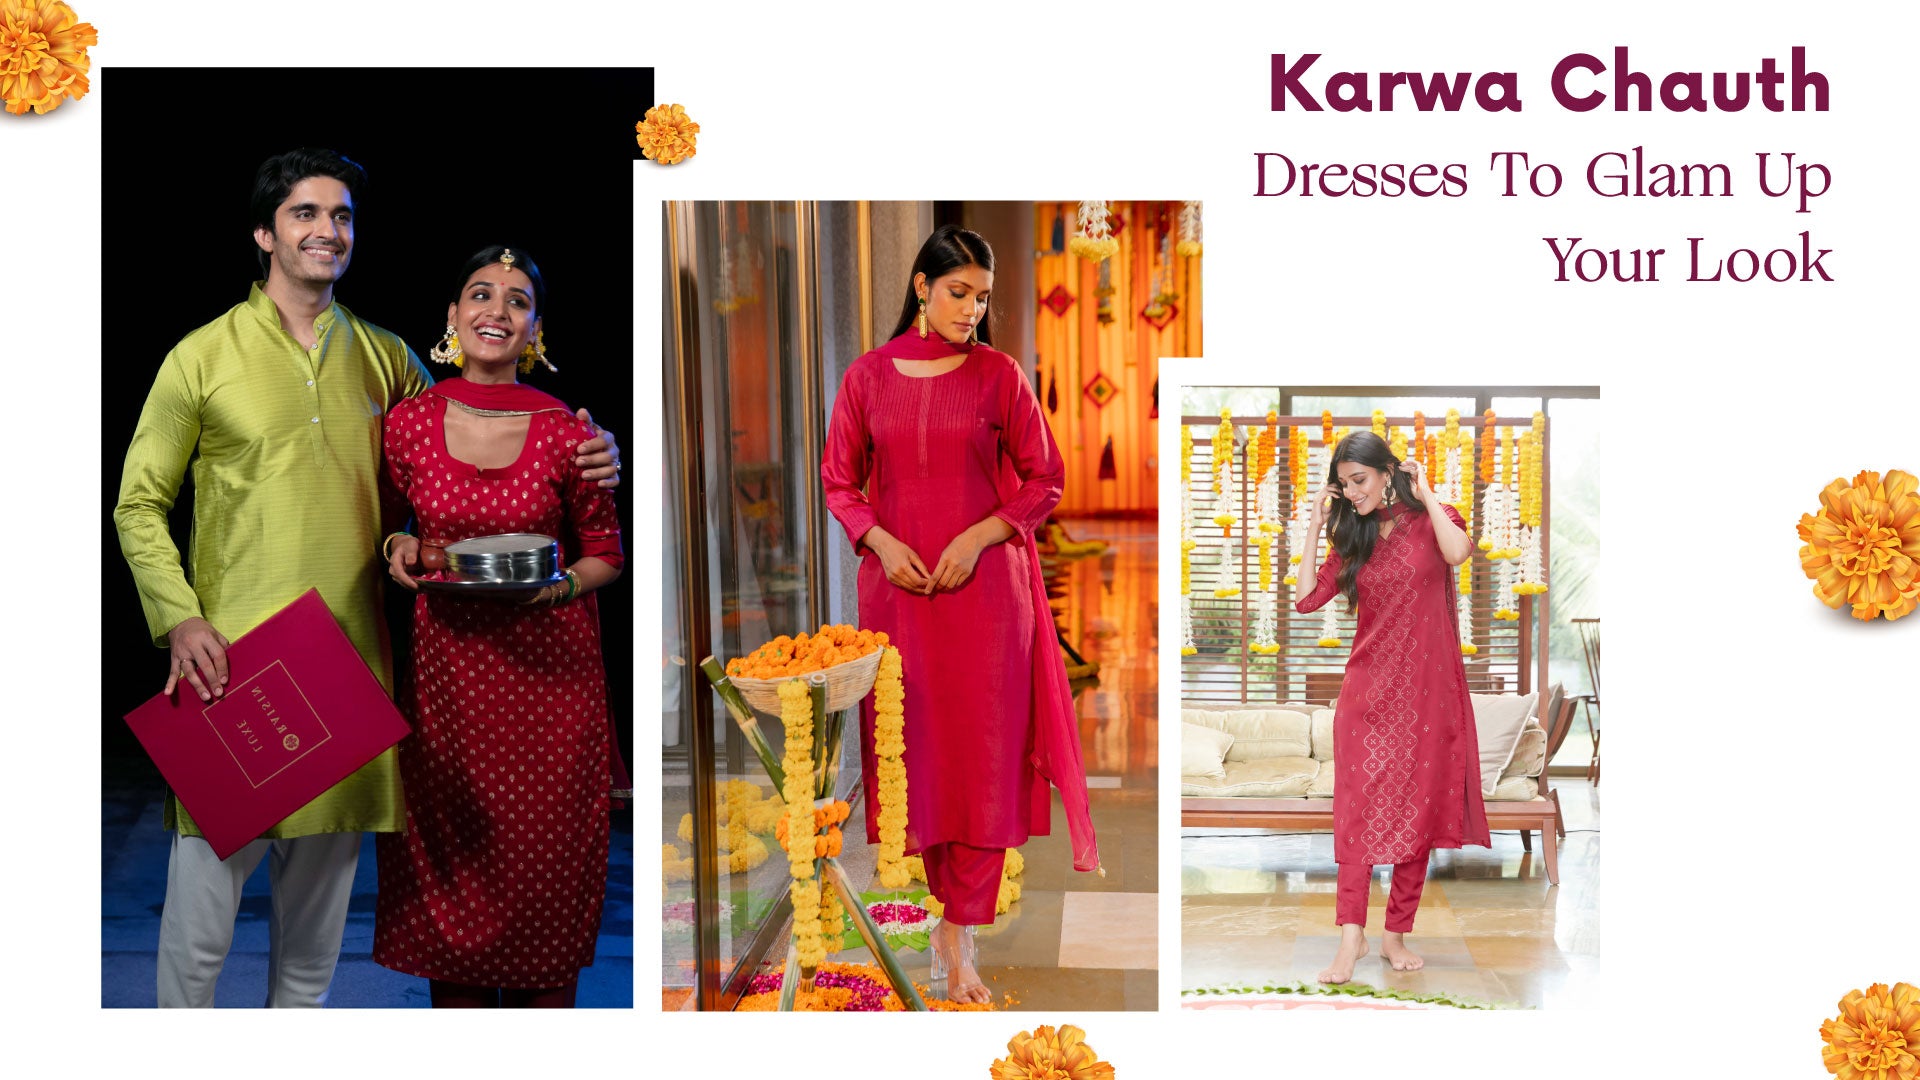 5 Gorgeous Karwa Chauth Dresses To Glam Up Your Look